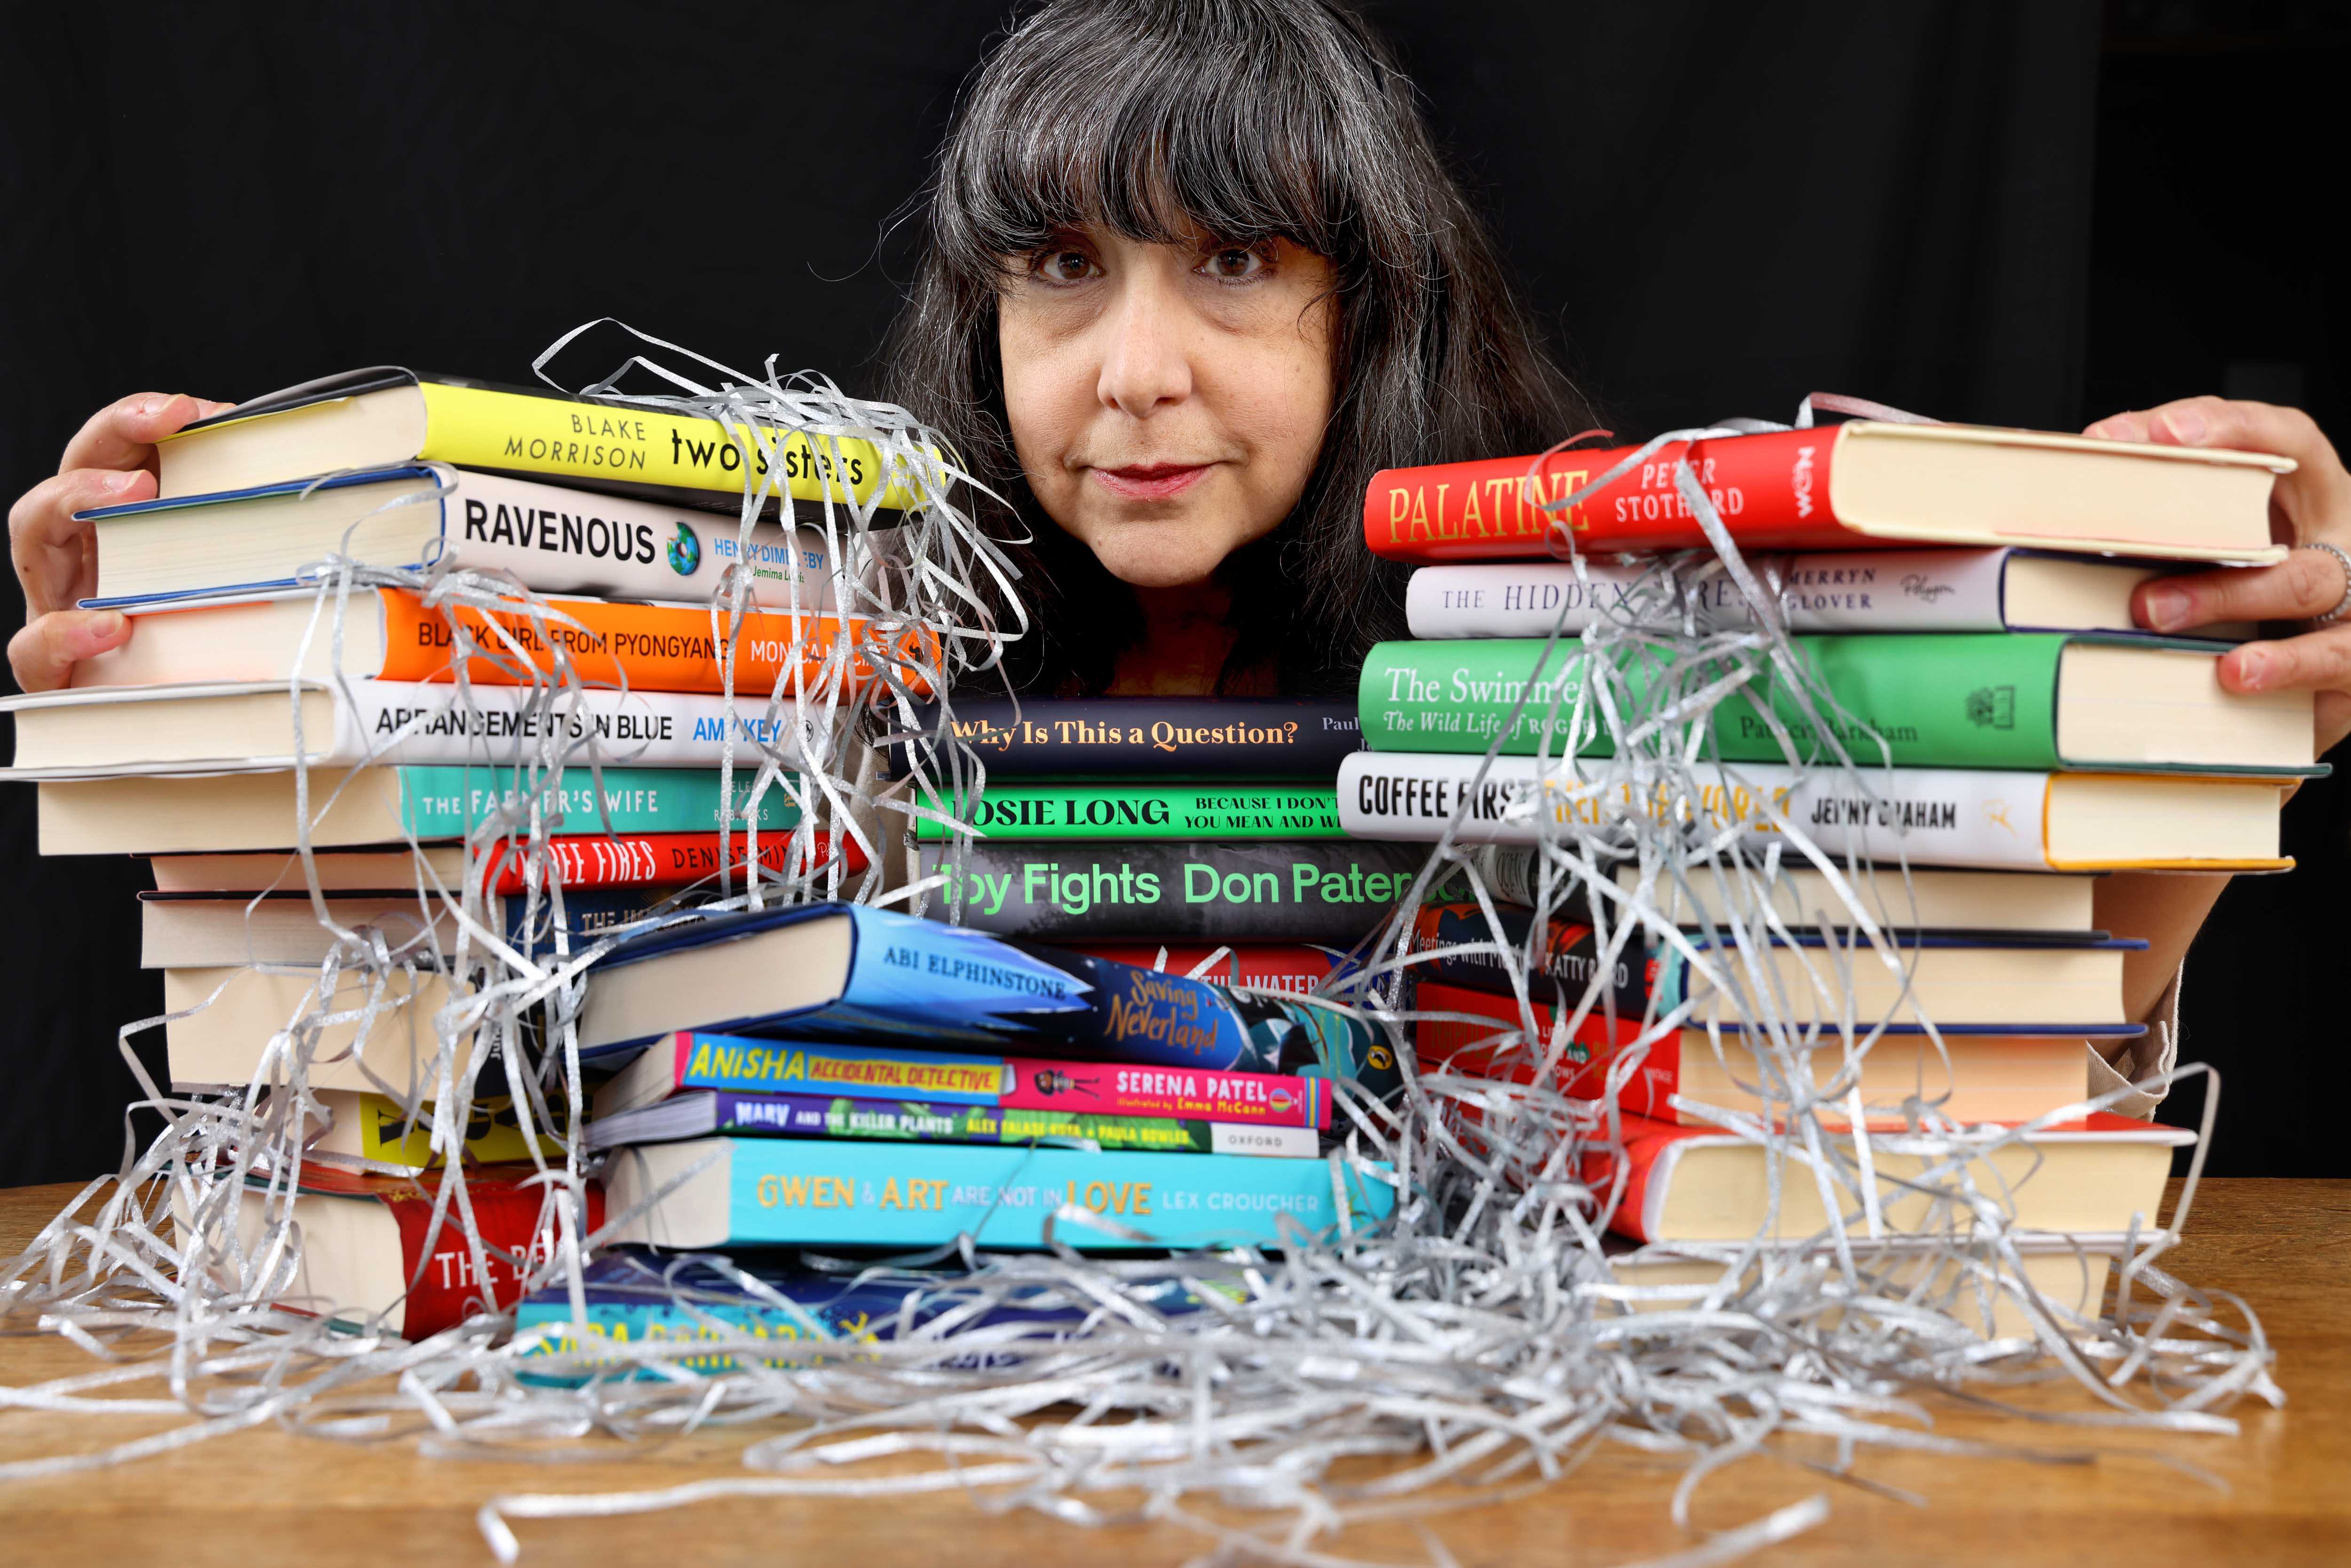 Lee Randall, Guest Programmer for Wigtown Festival Company, stands behind stacks of colourful books, only her head is visible between the books.